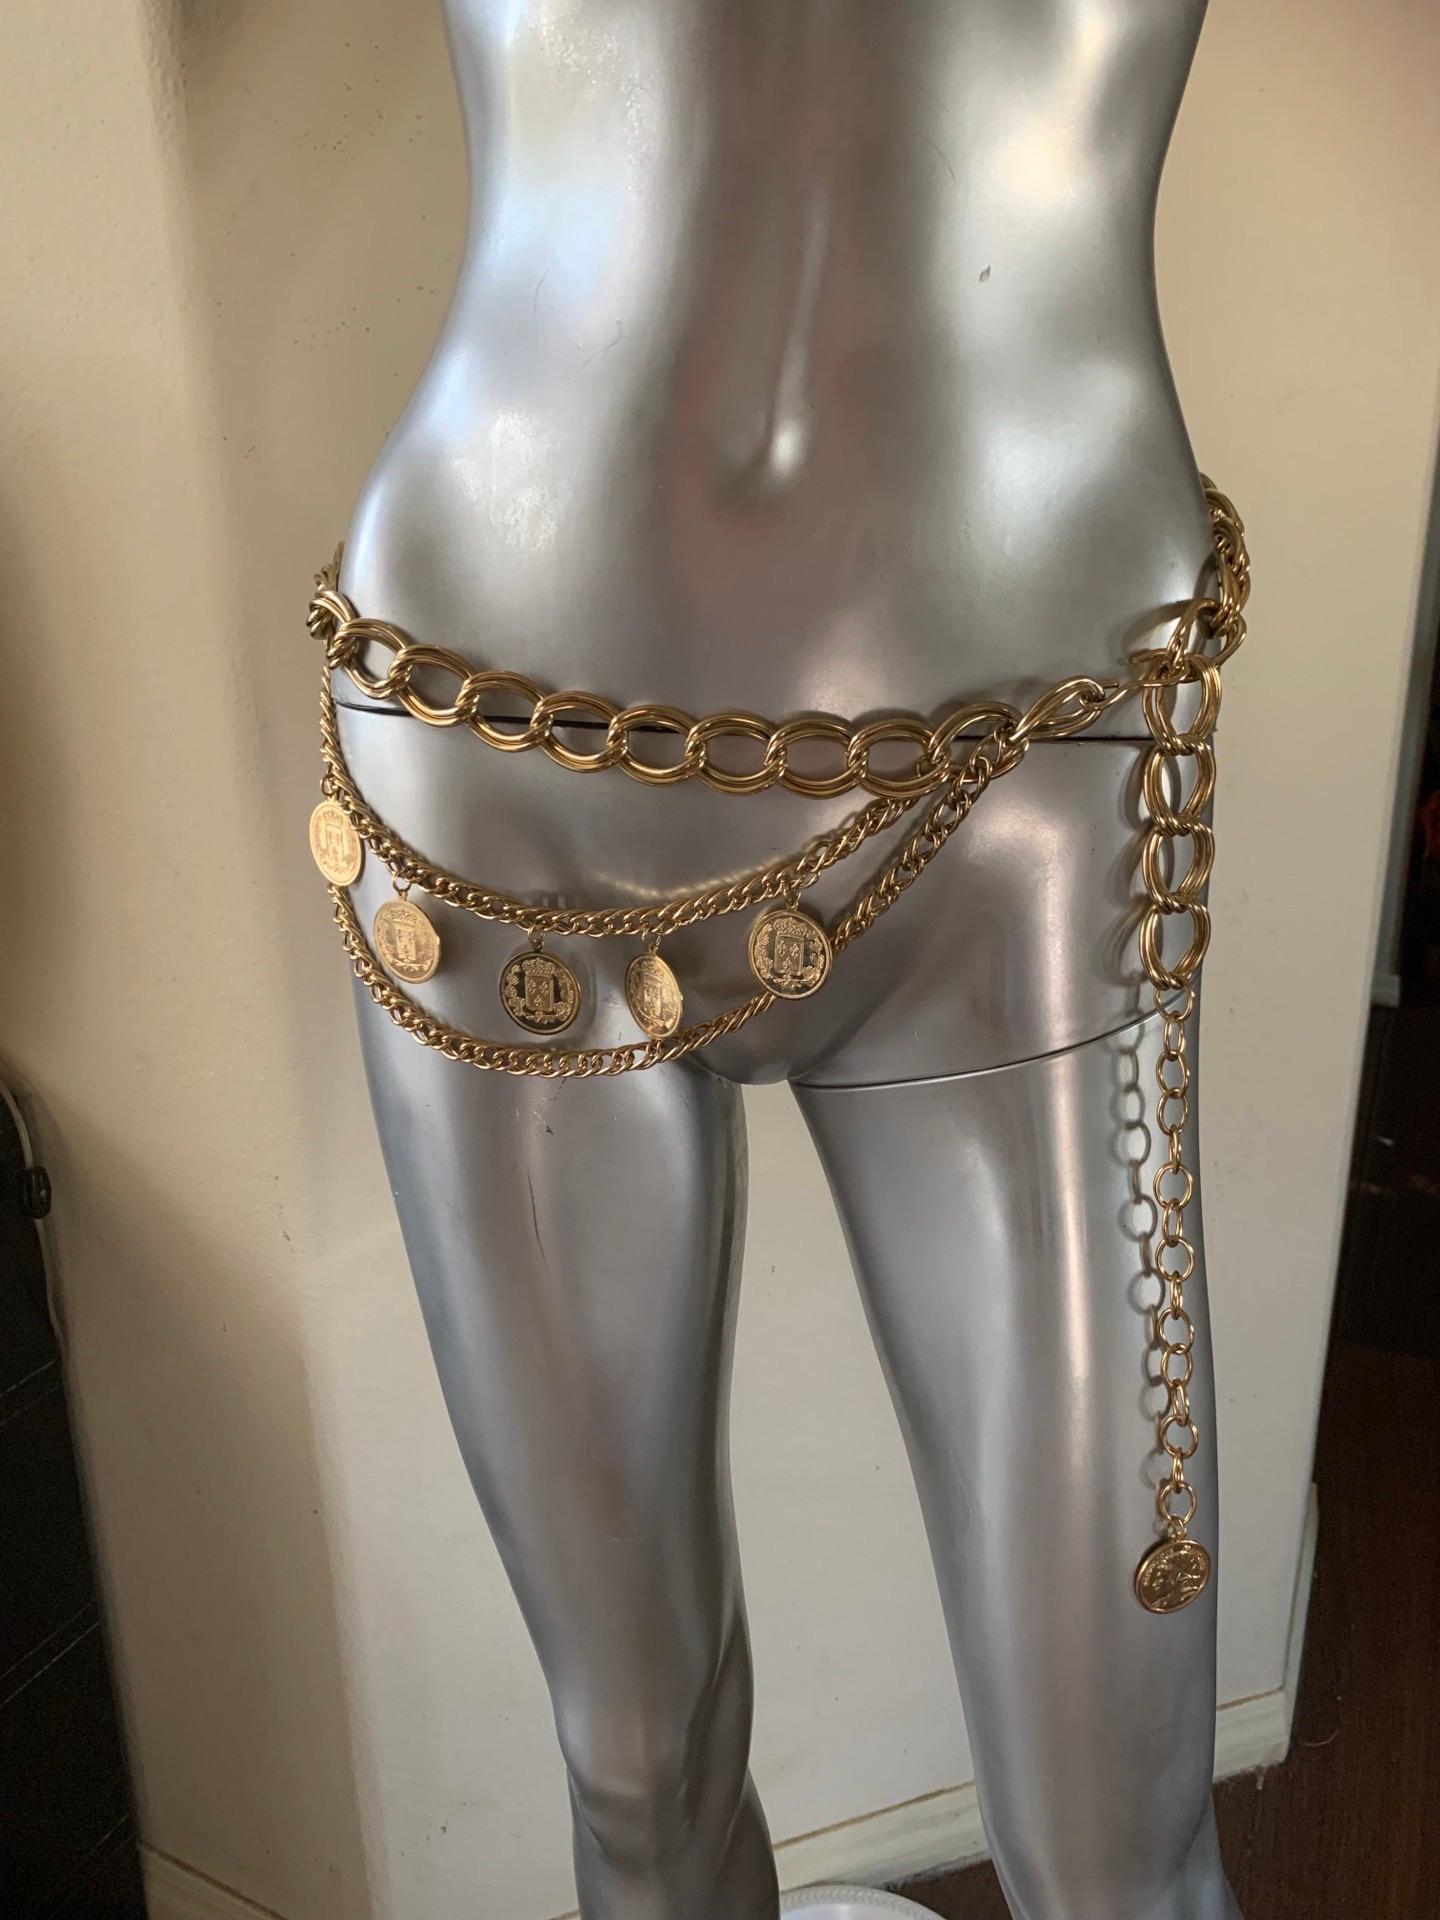 A beautiful chain belt purchased in NYC. Manufacturer unknown. Country of origin unknown. Faux French coins (doublesided) hand from shiny gold plated links and chains. Very, very chic. One size fits all. Plenty of length for all.